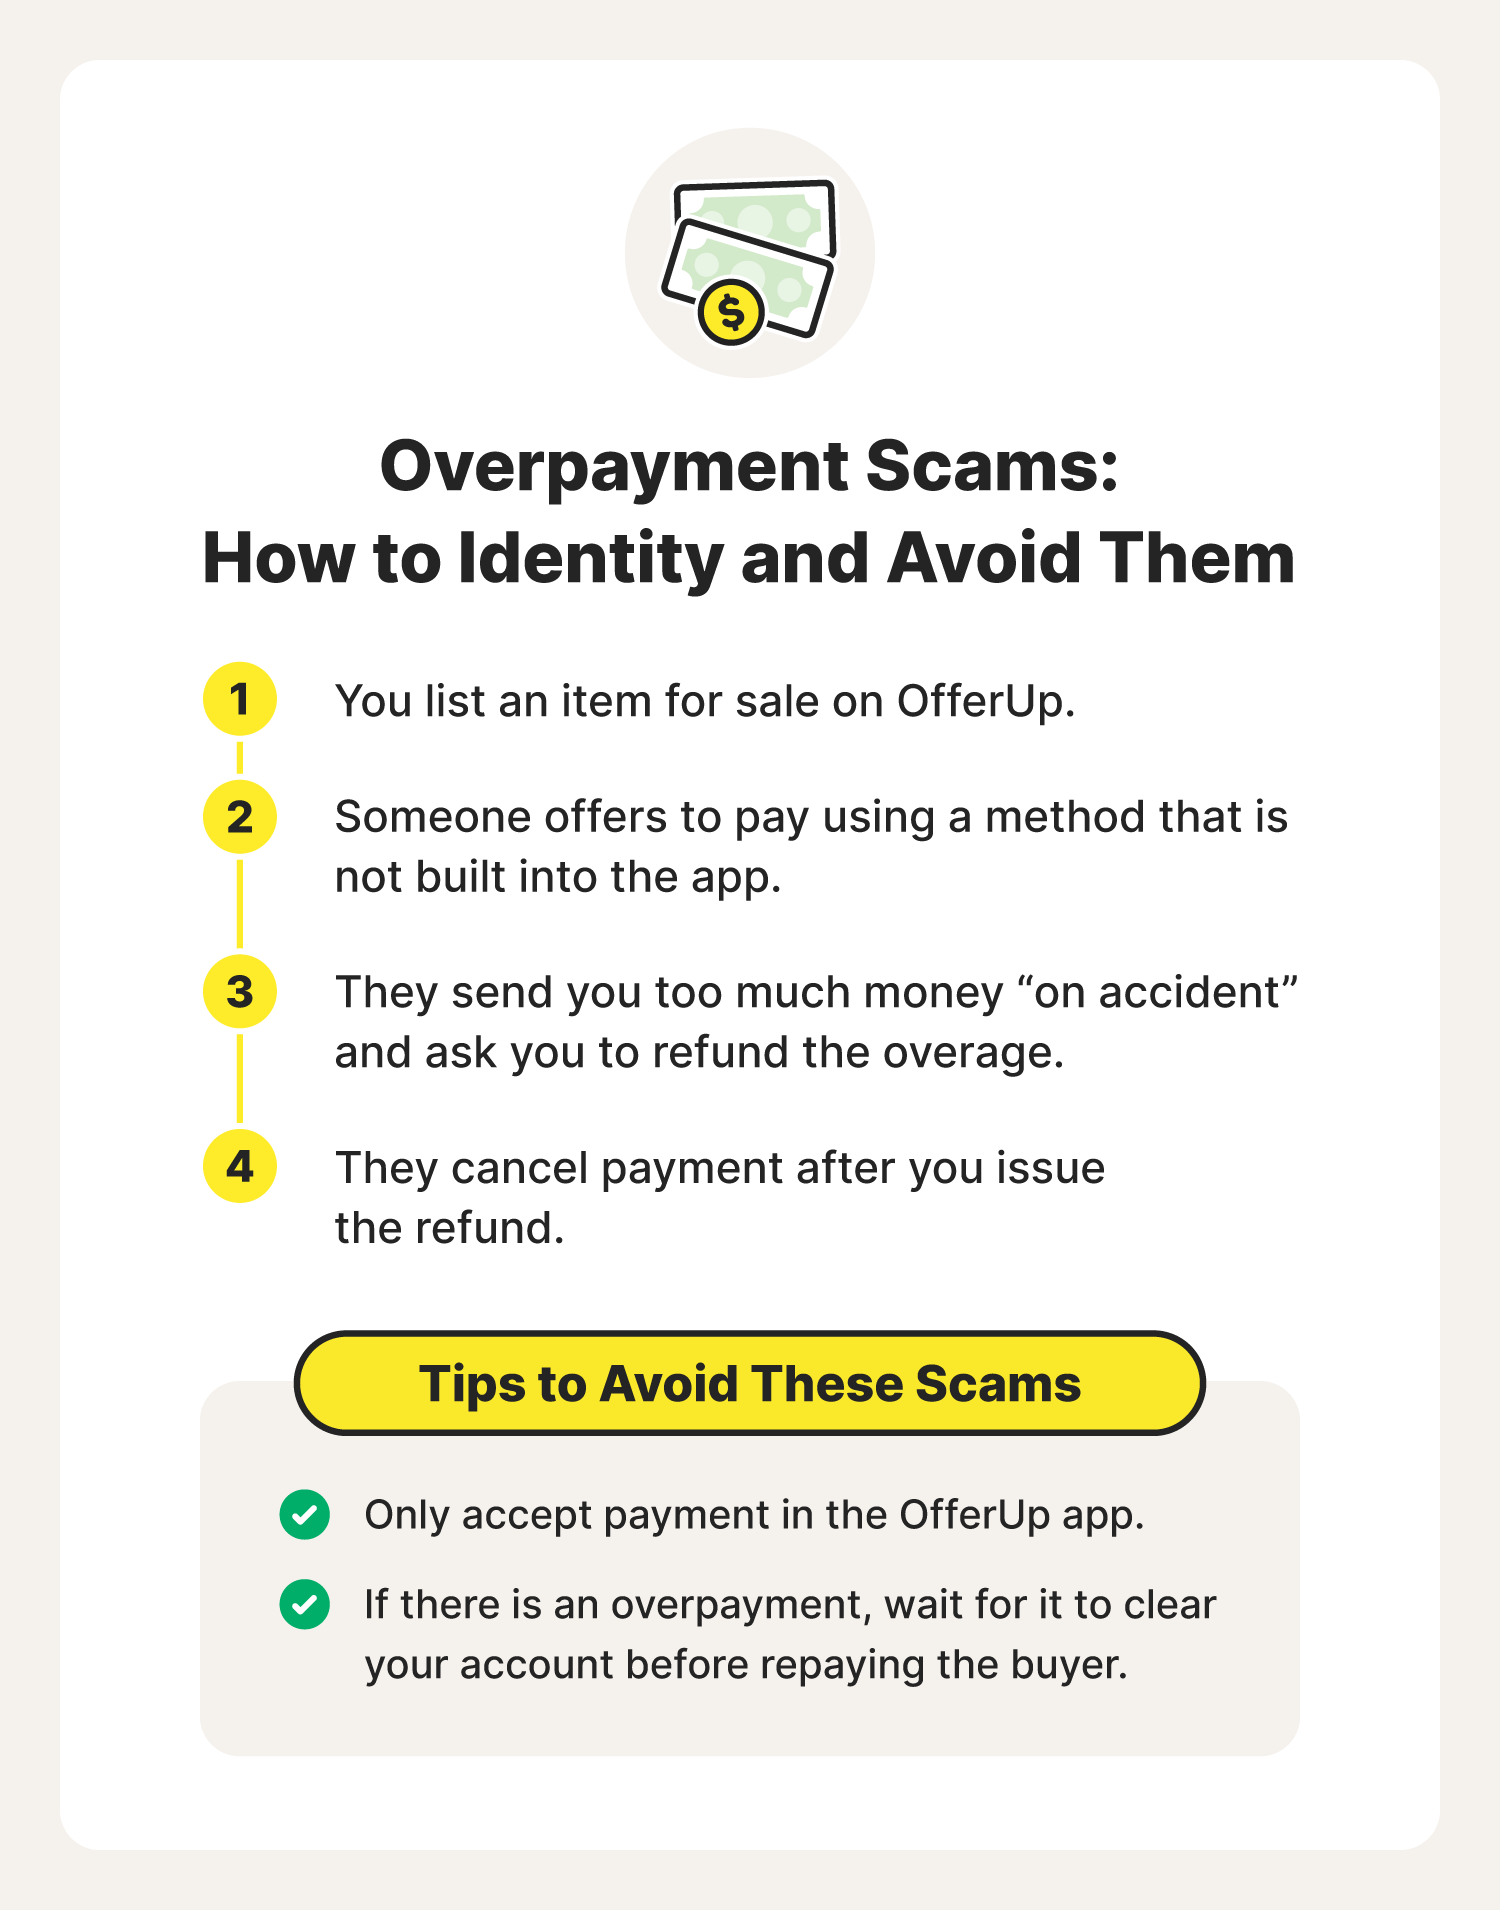 Illustrated chart describing overpayment scams and tips for avoiding them by paying in the OfferUp app.